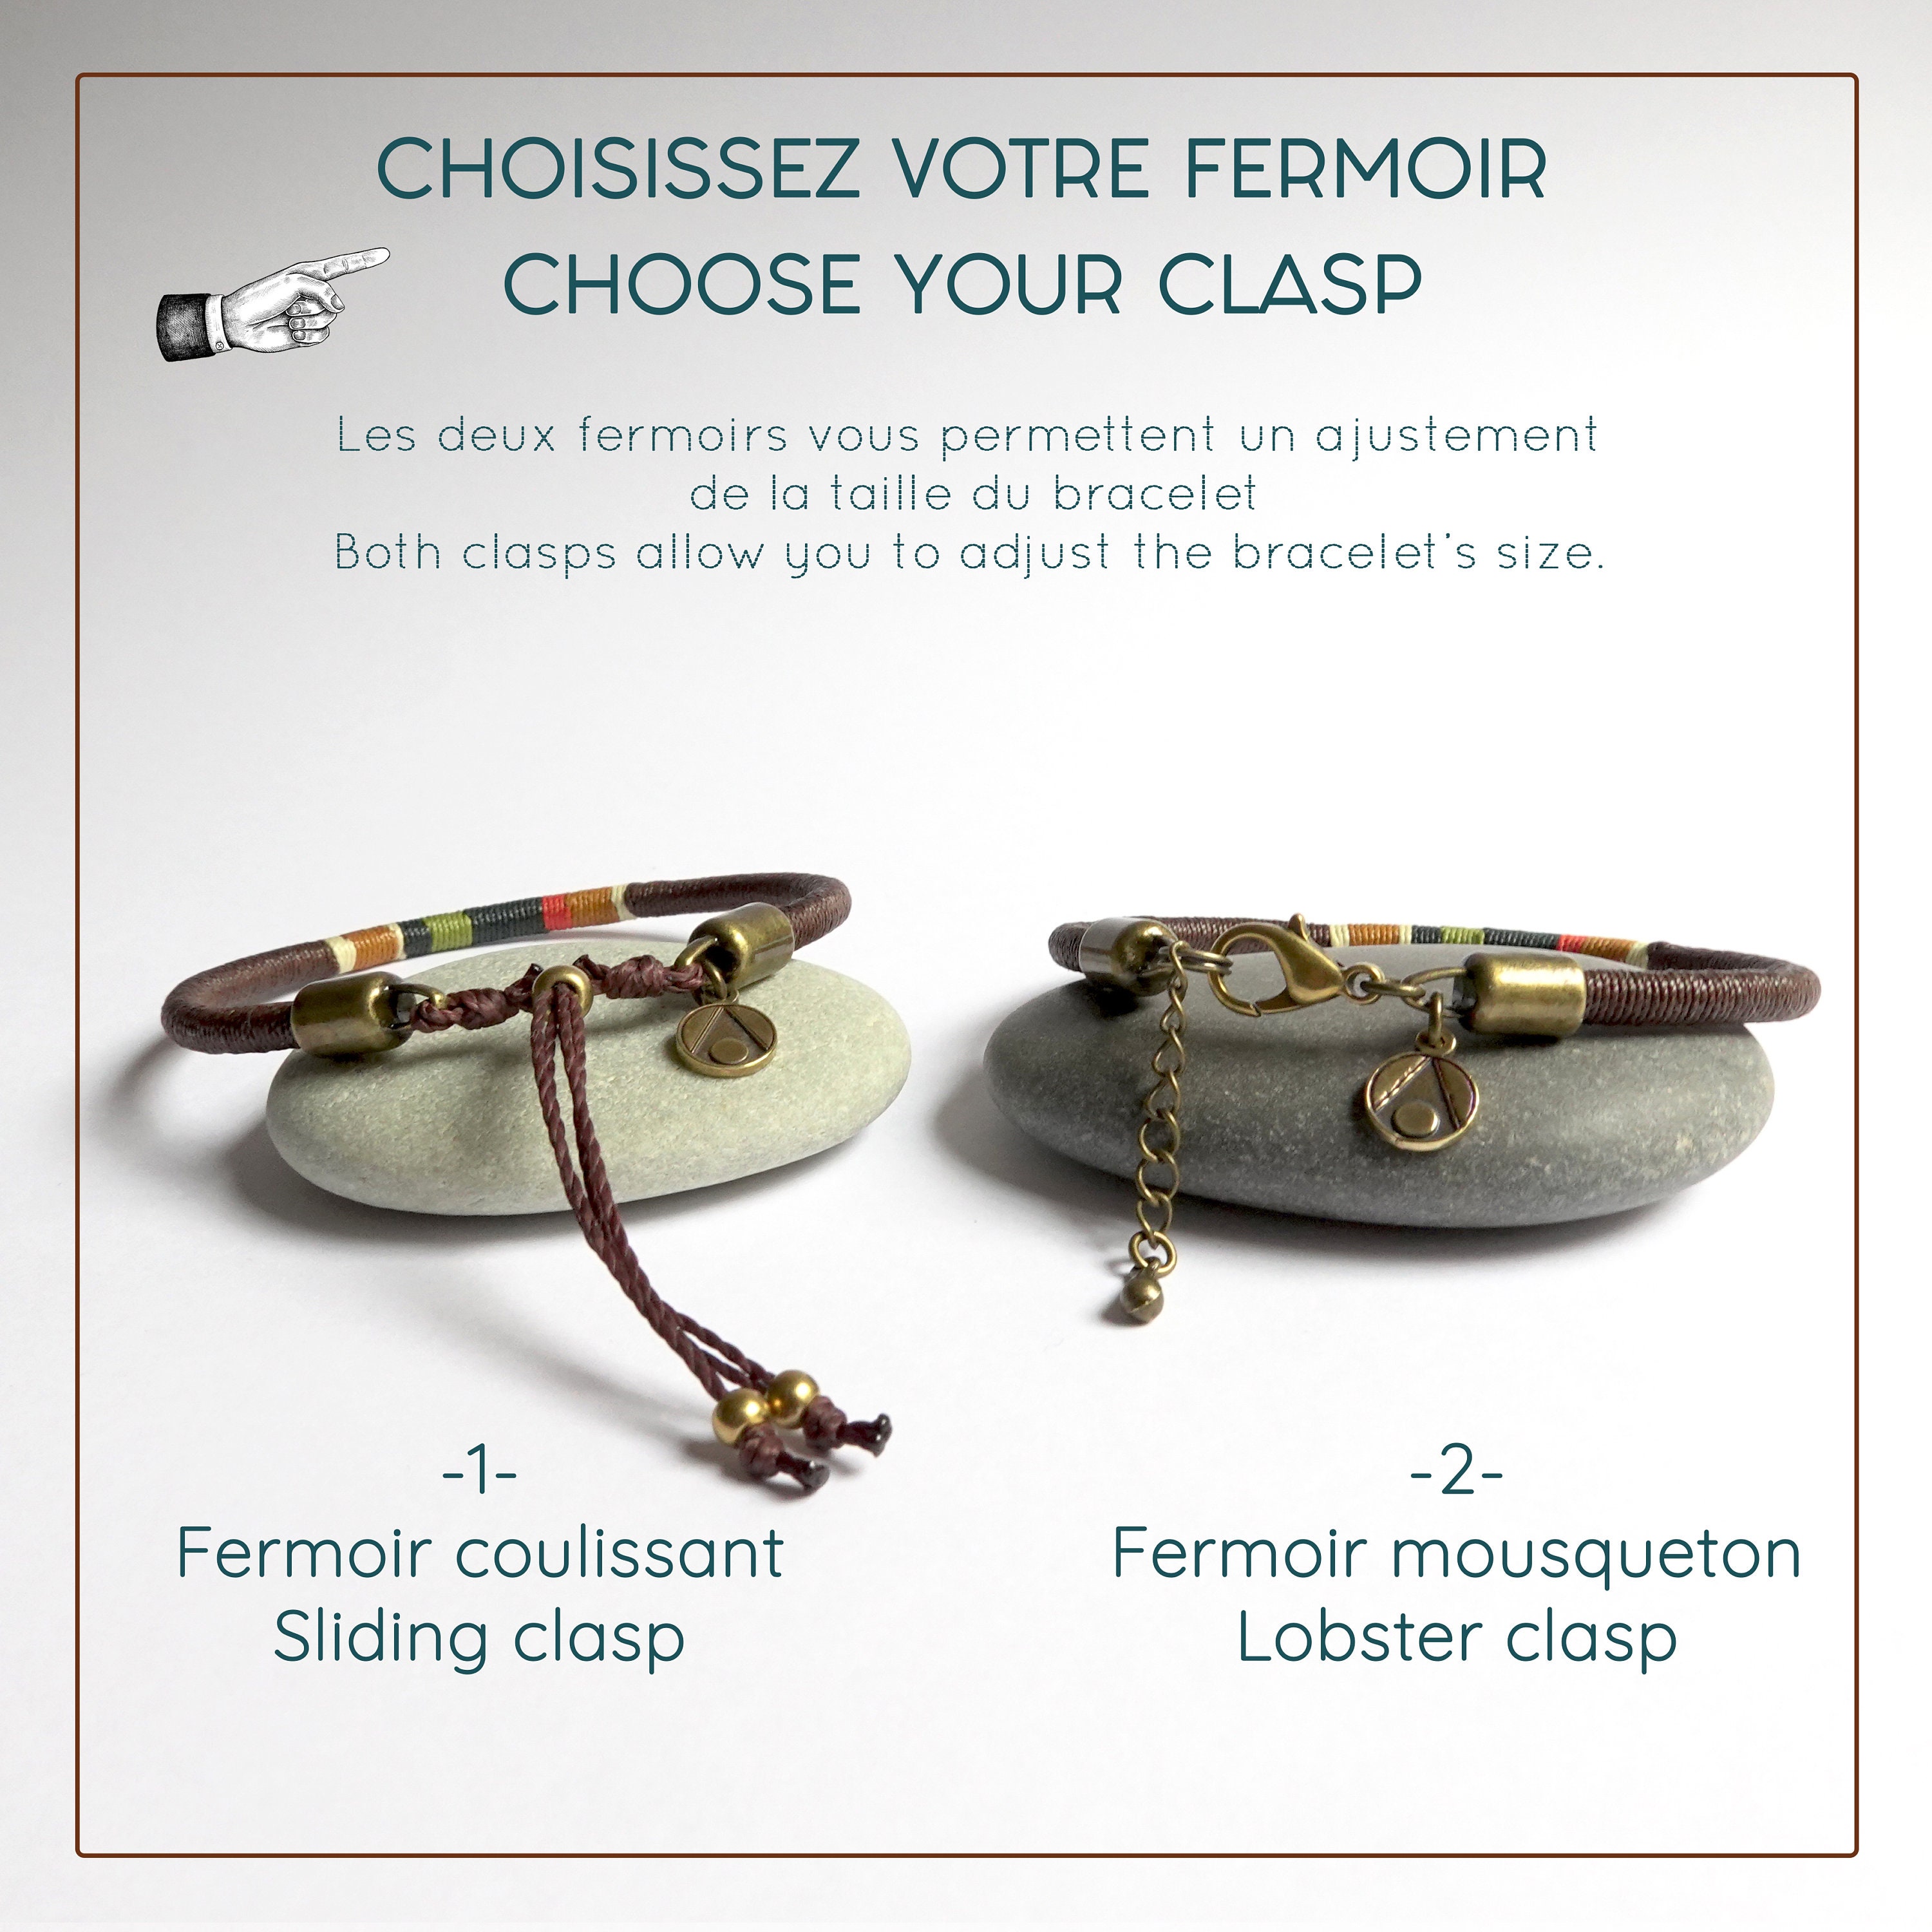 Choose Your Clasp